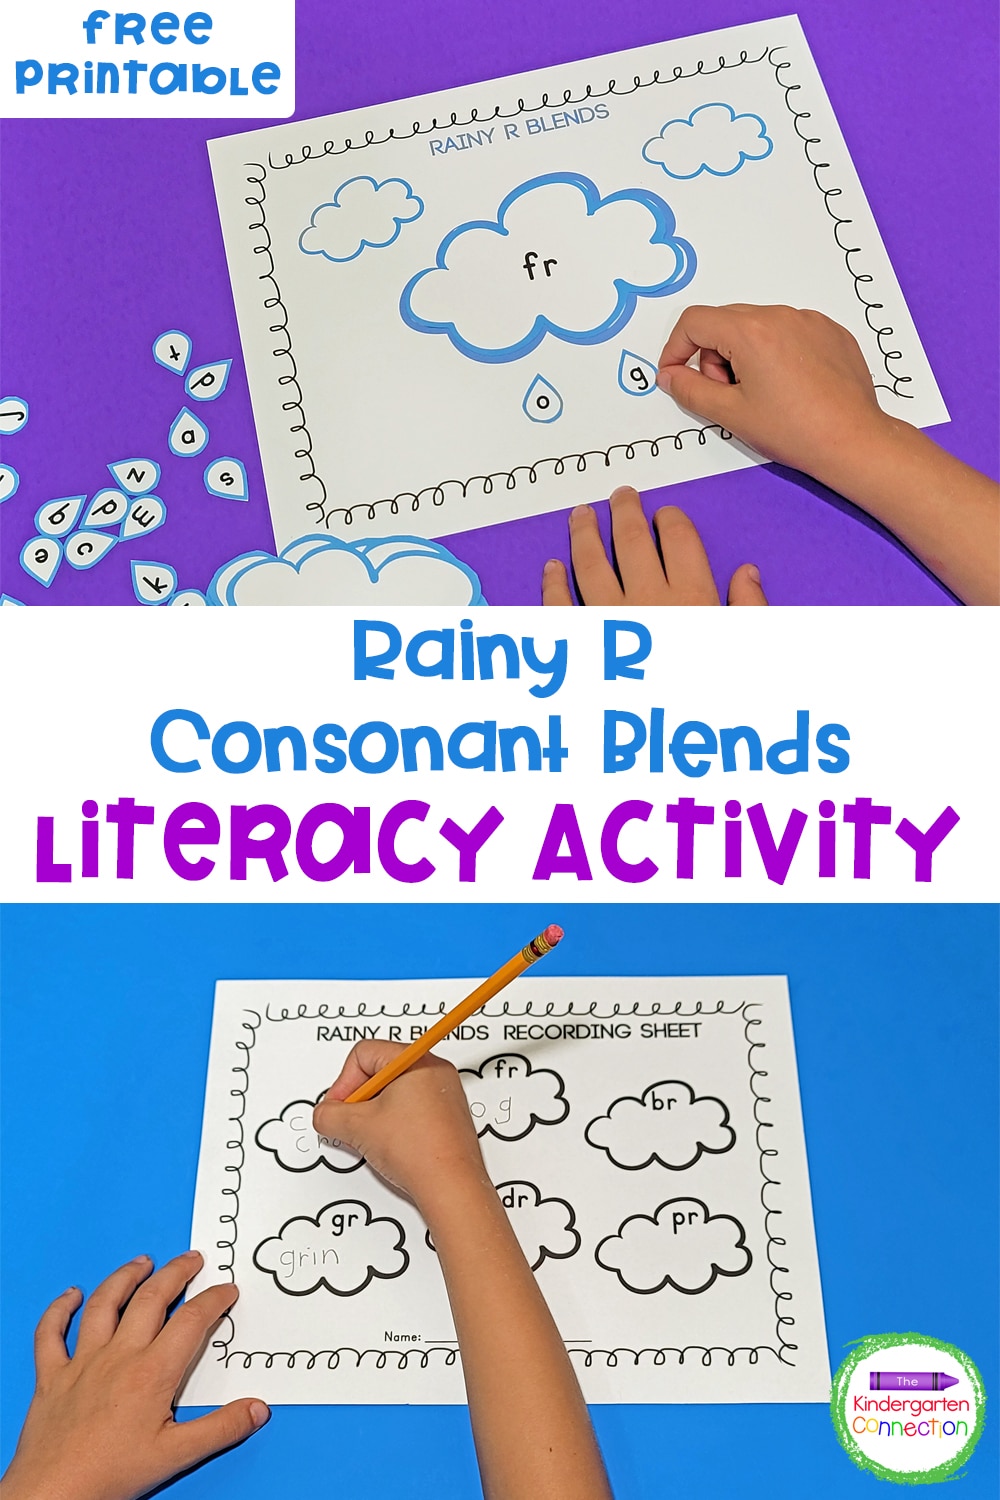 Use this free Rainy "R" Consonant Blends Activity in your literacy centers or small groups to make learning blends engaging and interactive!